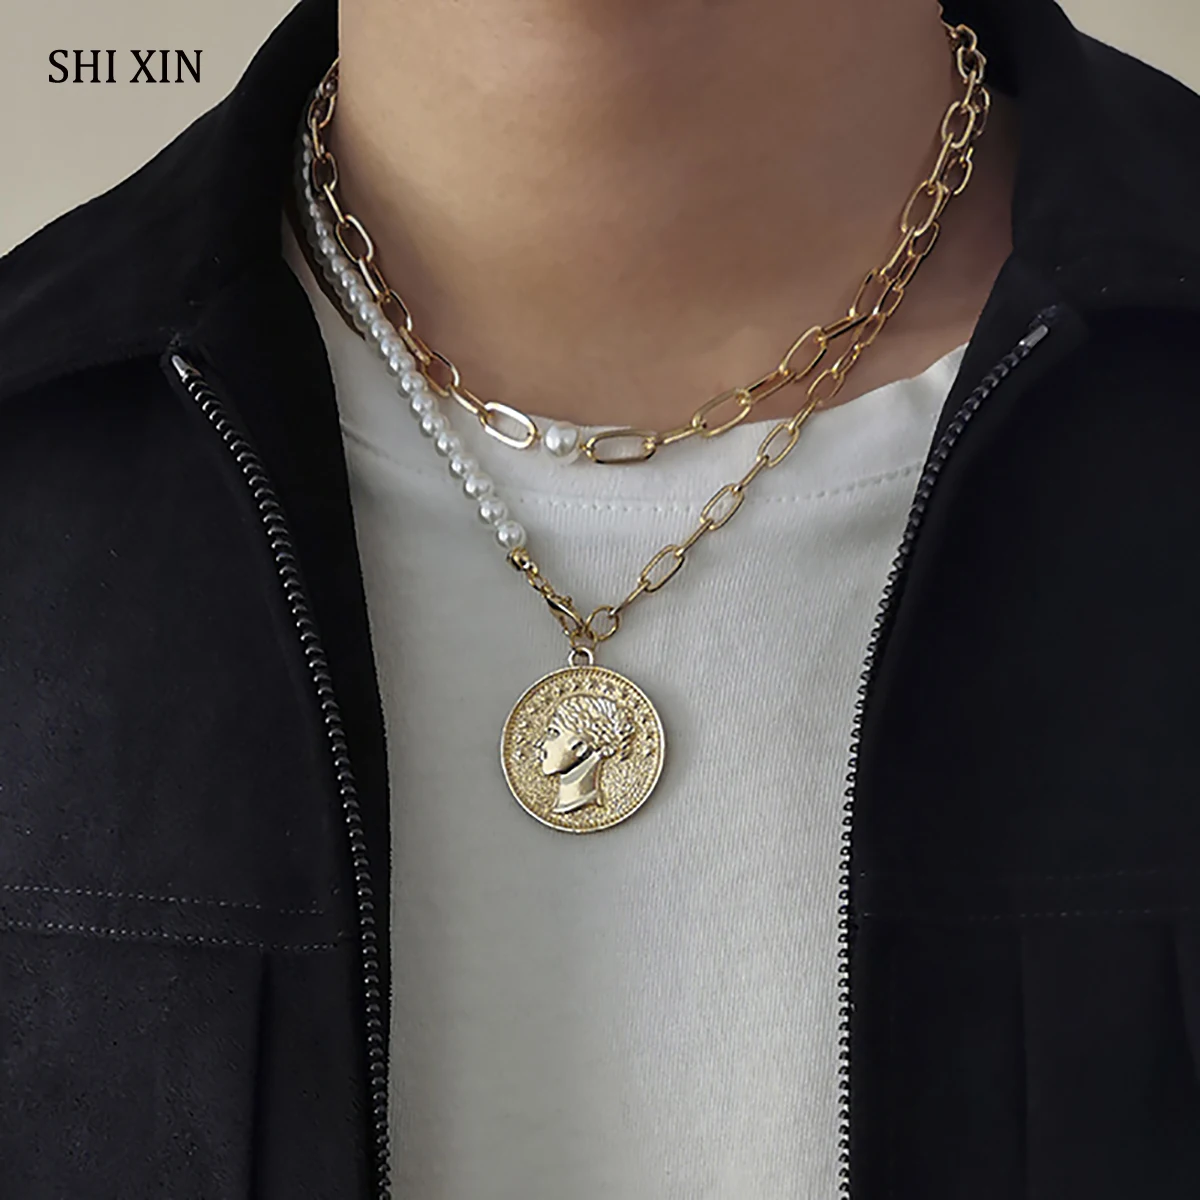 

SHIXIN Multi Layered Chain Pearl Beads Necklace for Women Fashion Choker Necklace Long Chain With Coin Pendant Necklaces Jewelry